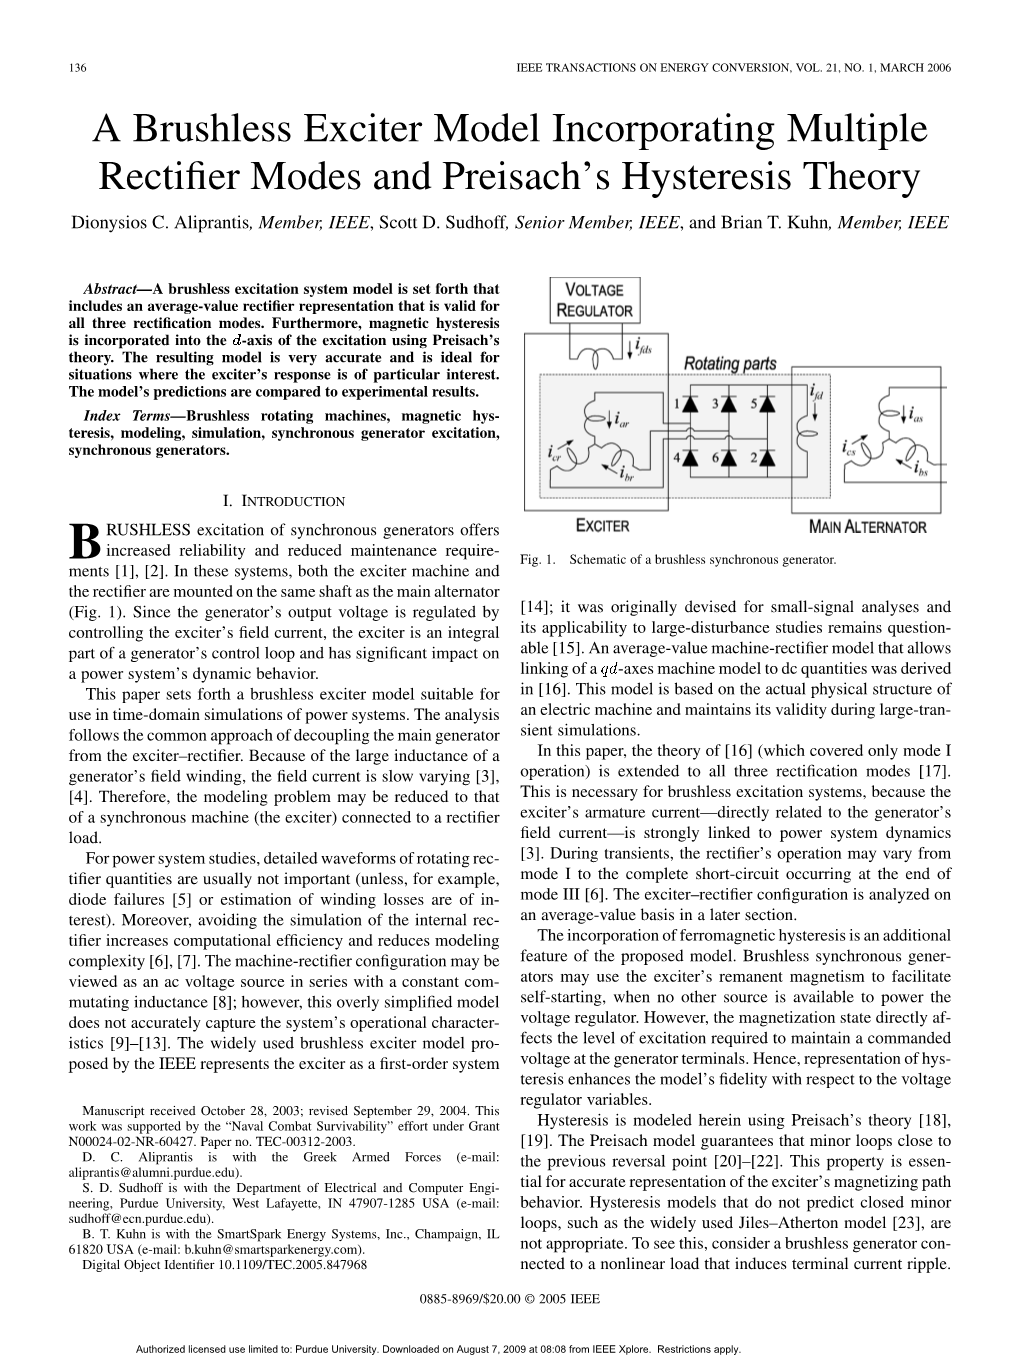 A Brushless Exciter Model Incorporating Multiple Rectifier Modes 137